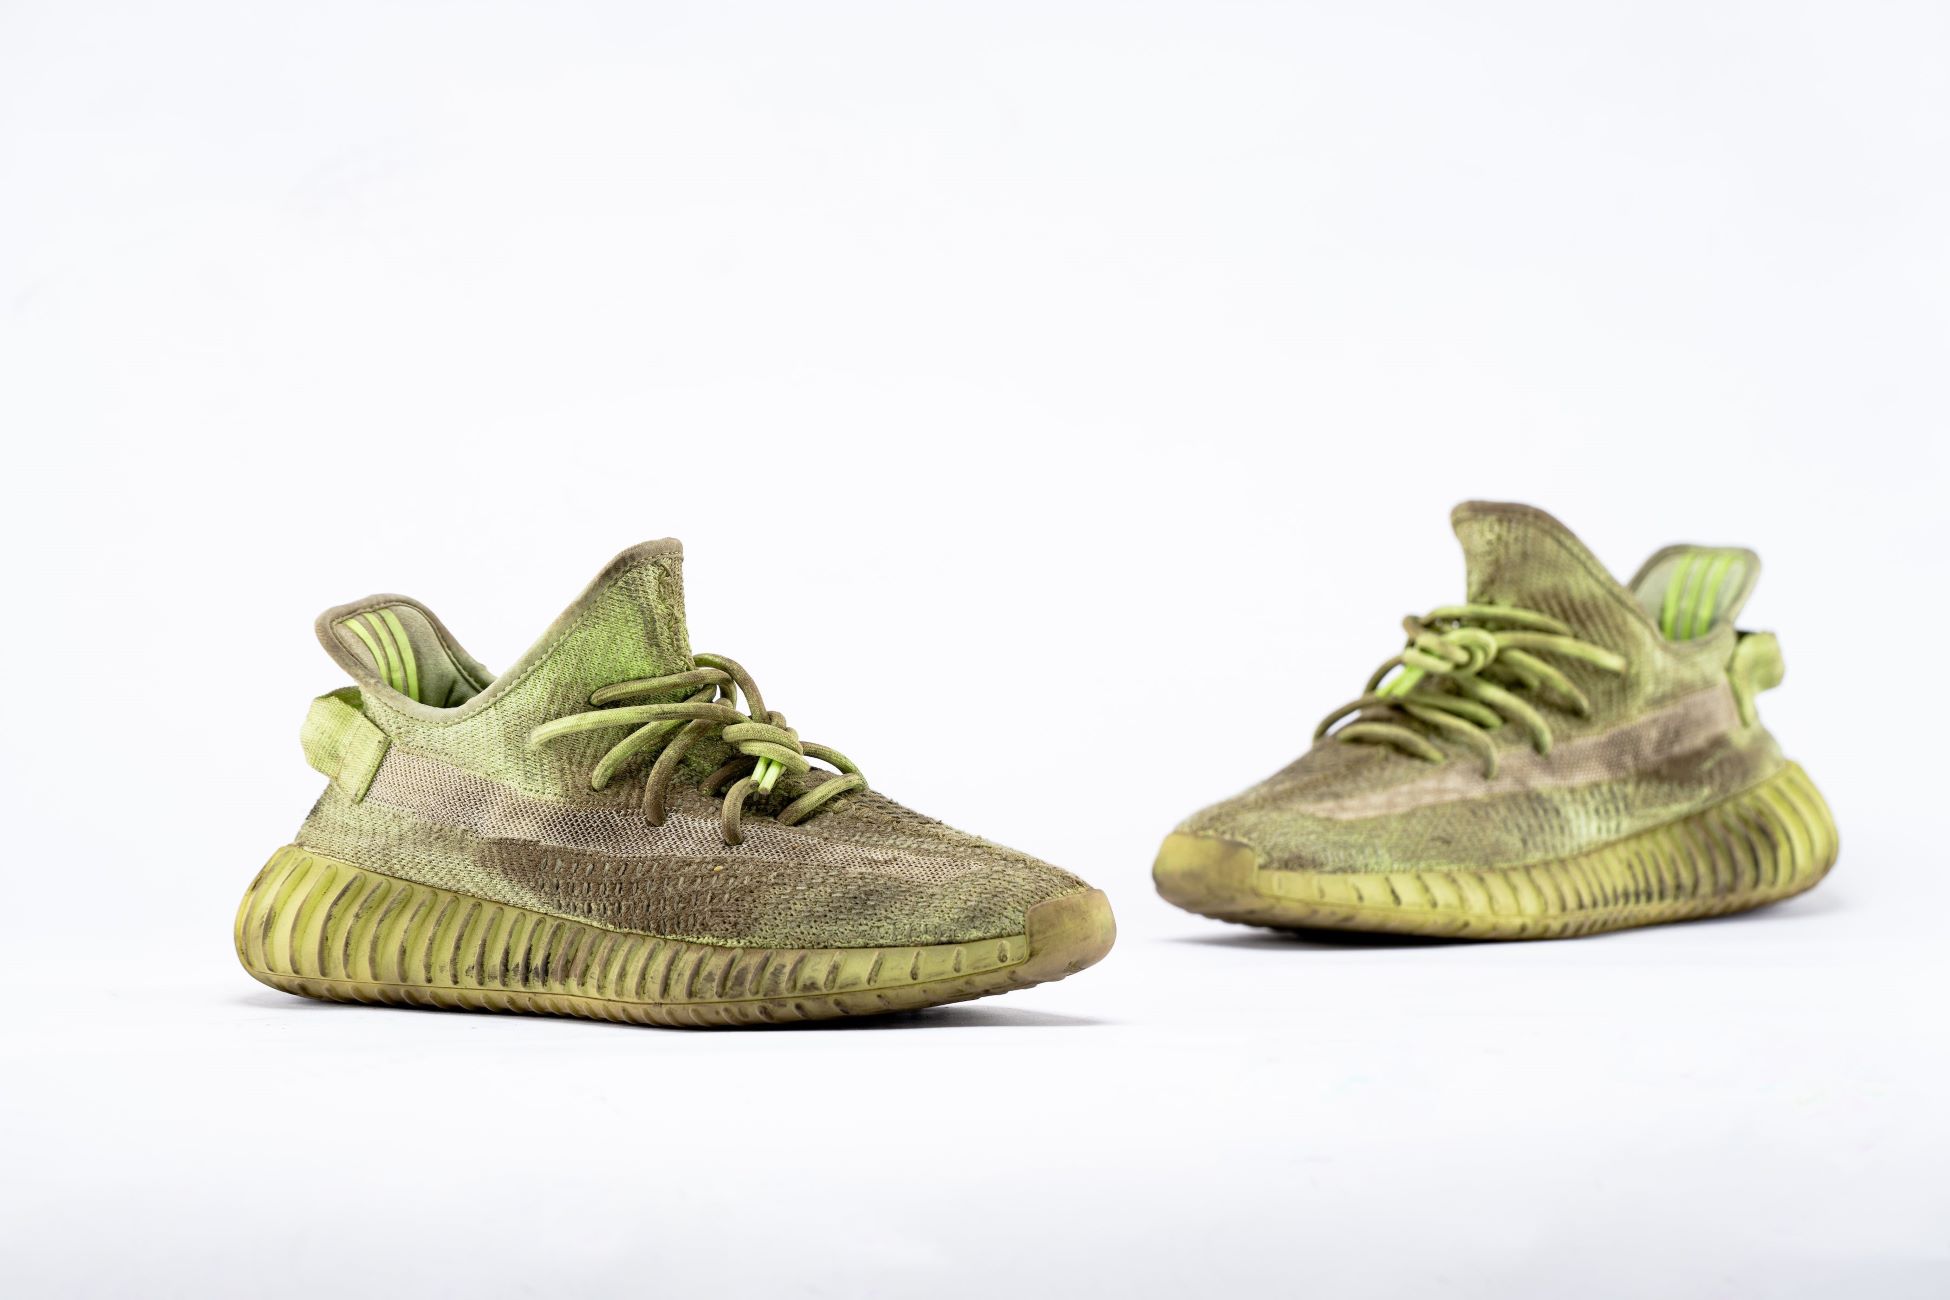 How To Clean Yeezys In A Washing Machine